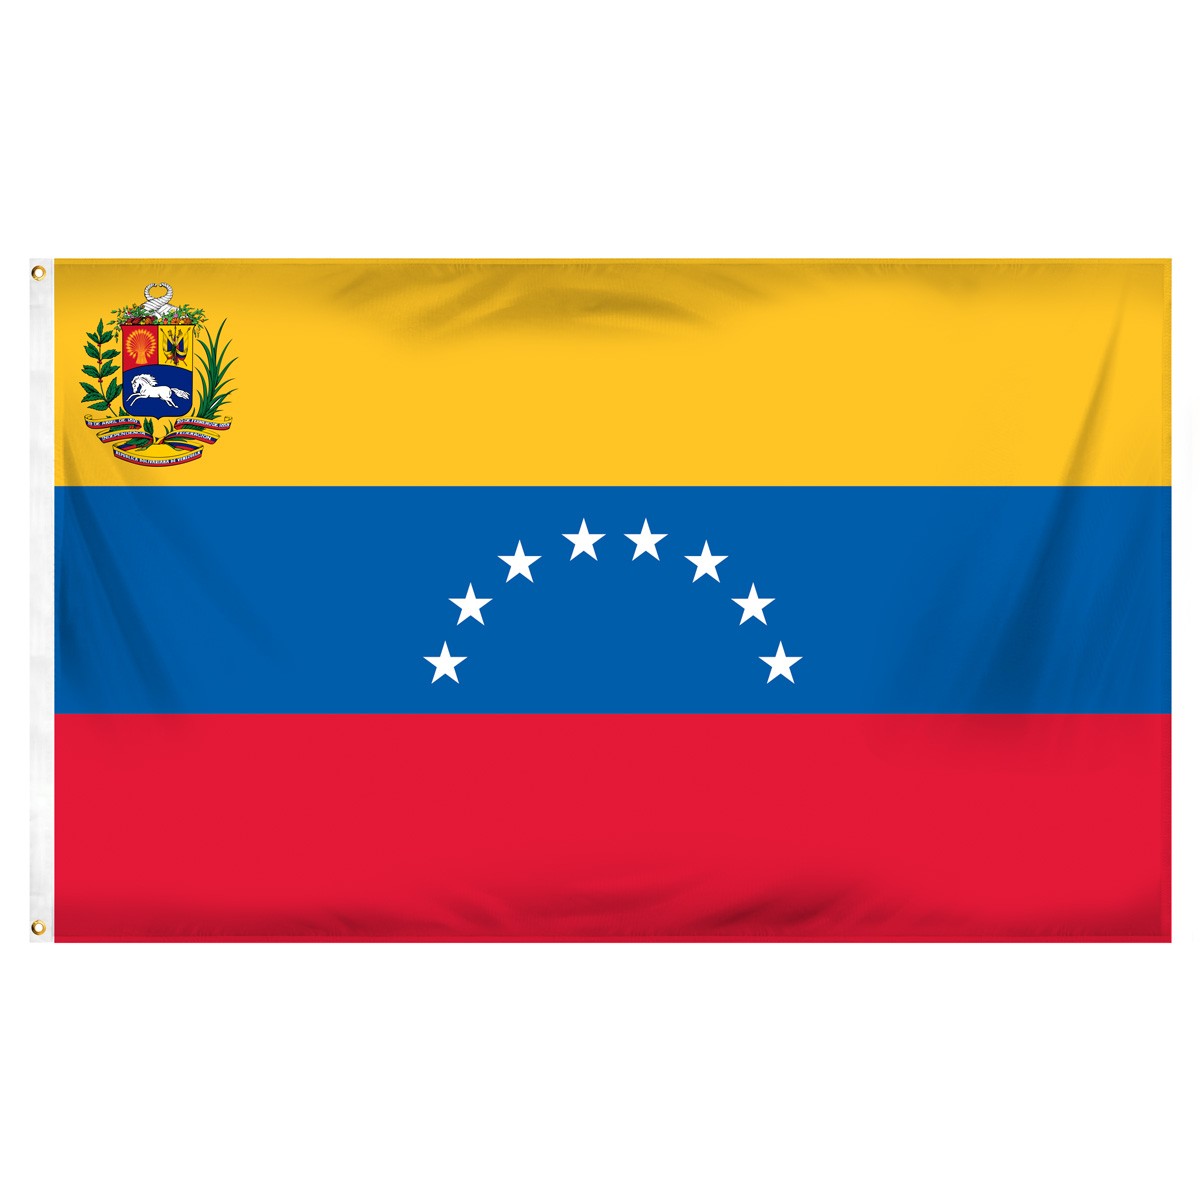 Venezuela Submit Flags and Flags